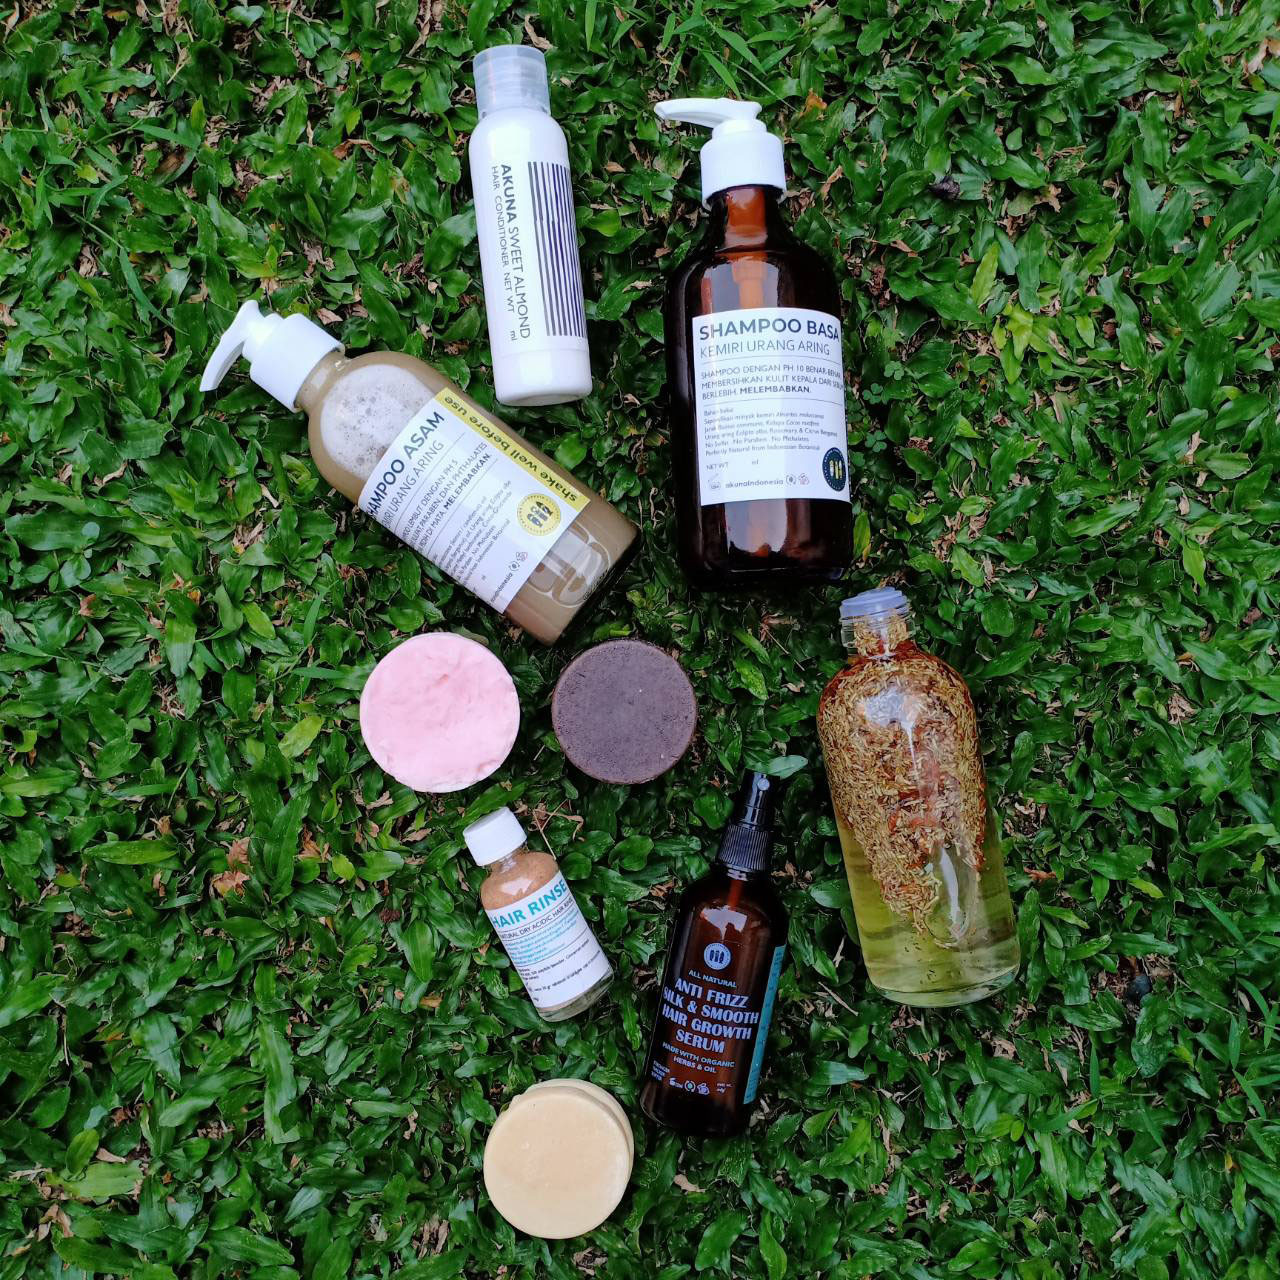 Glowing with ‘jamu’: Skincare brands rely on traditional recipes